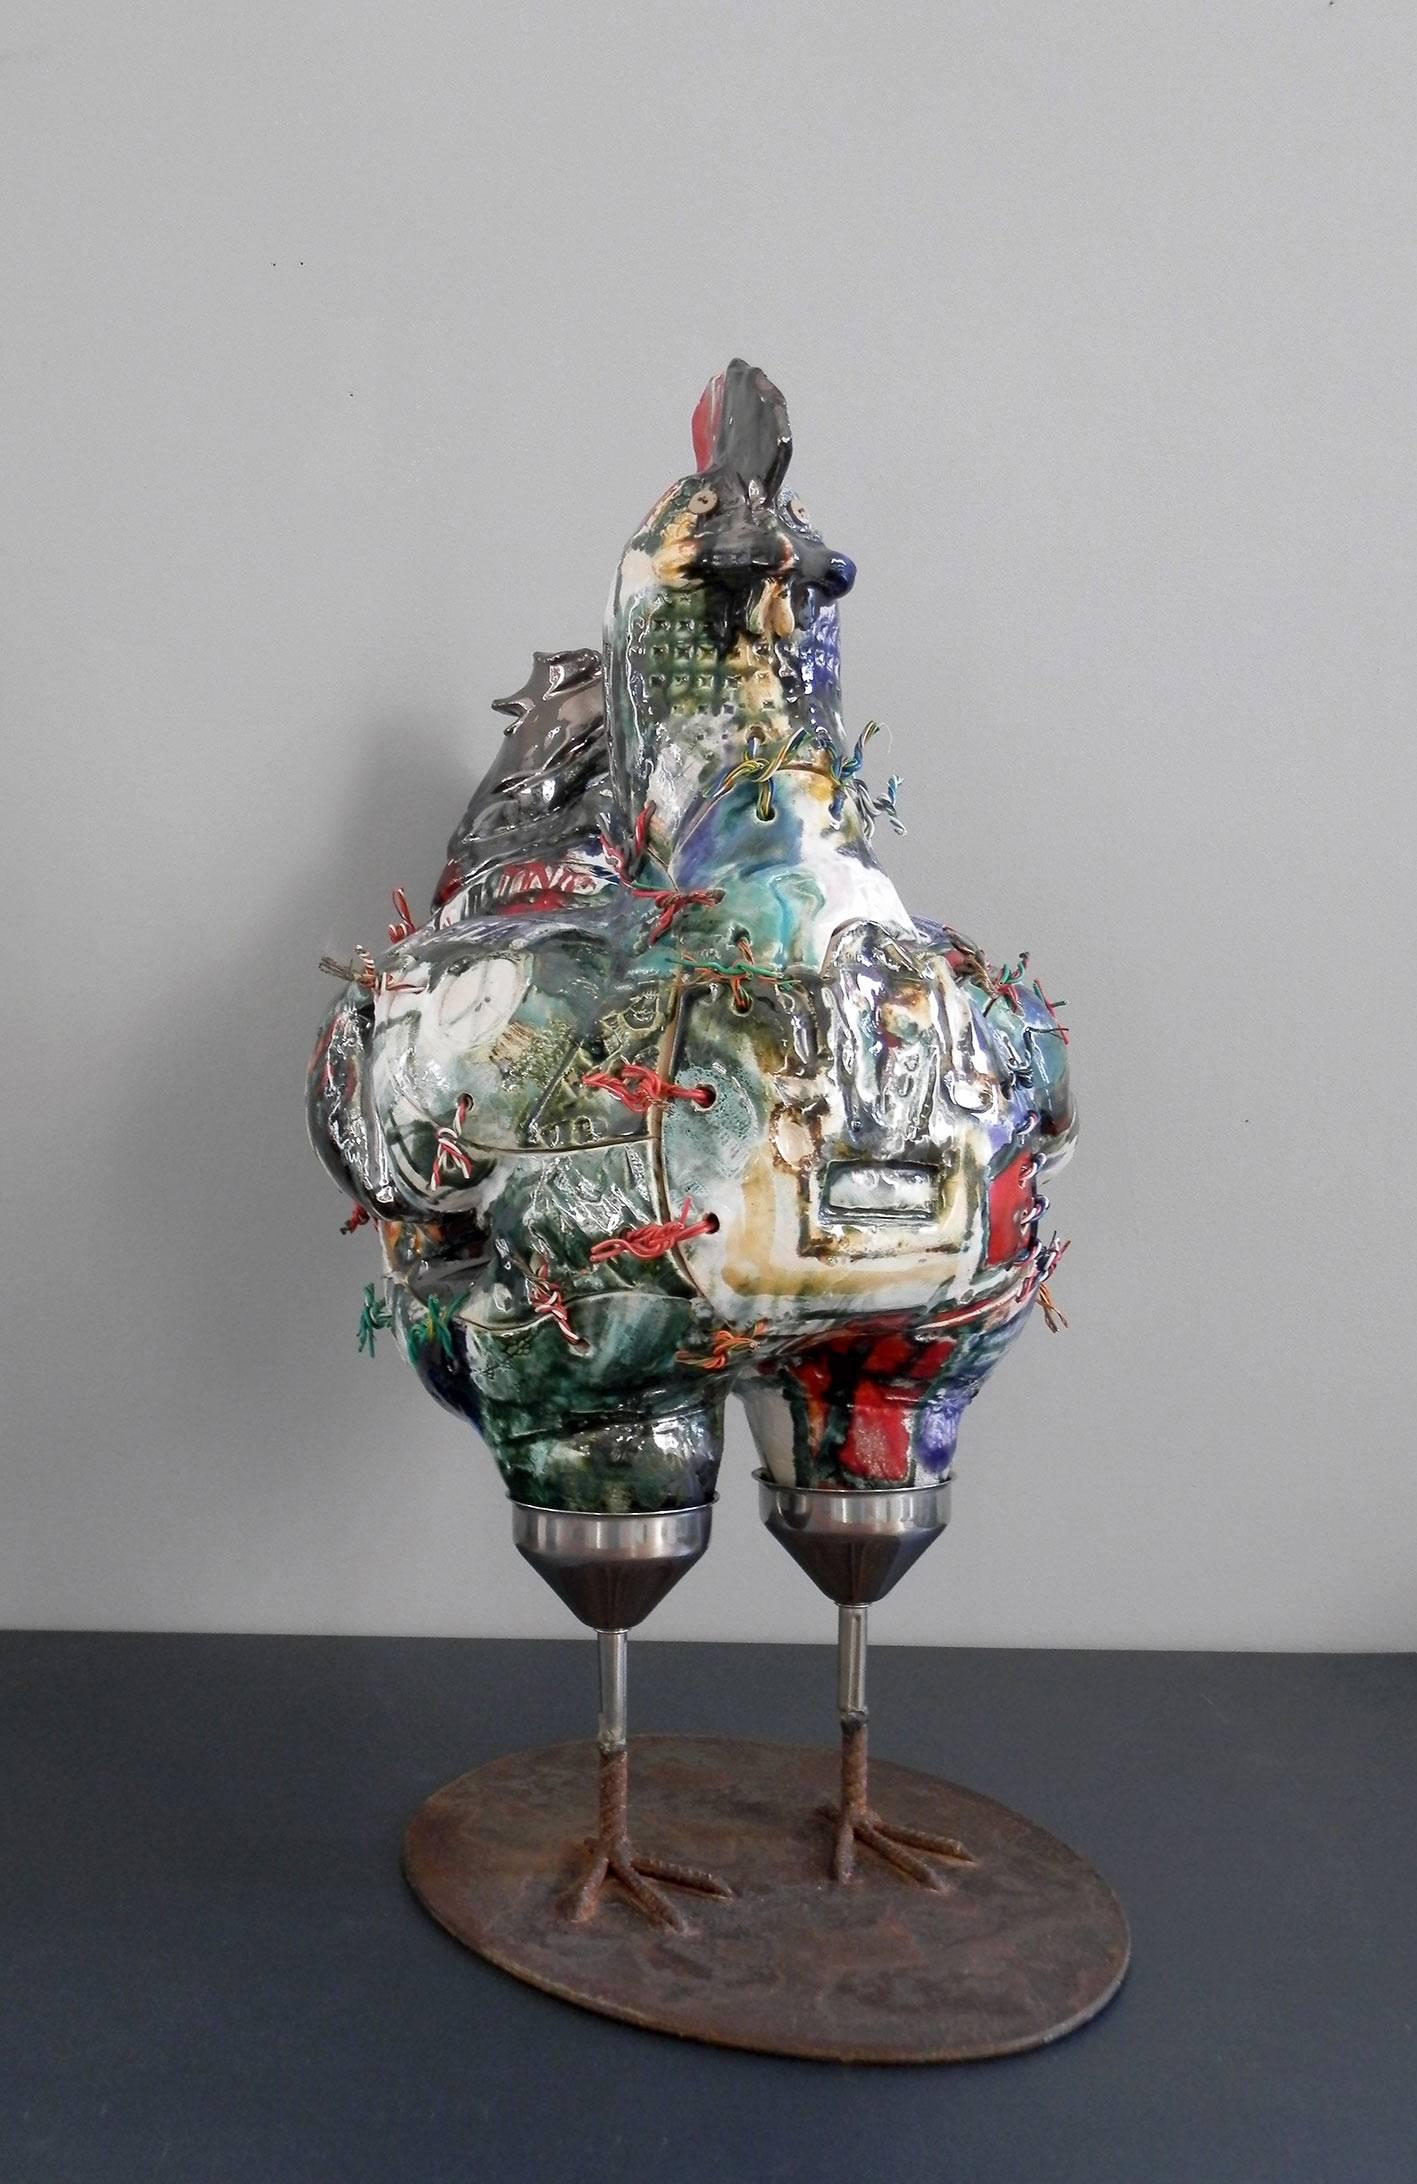 Lifesize Glazed Ceramic Hen Sculpture by Italian Artist Roberta Colombo In Excellent Condition For Sale In Vimercate, IT